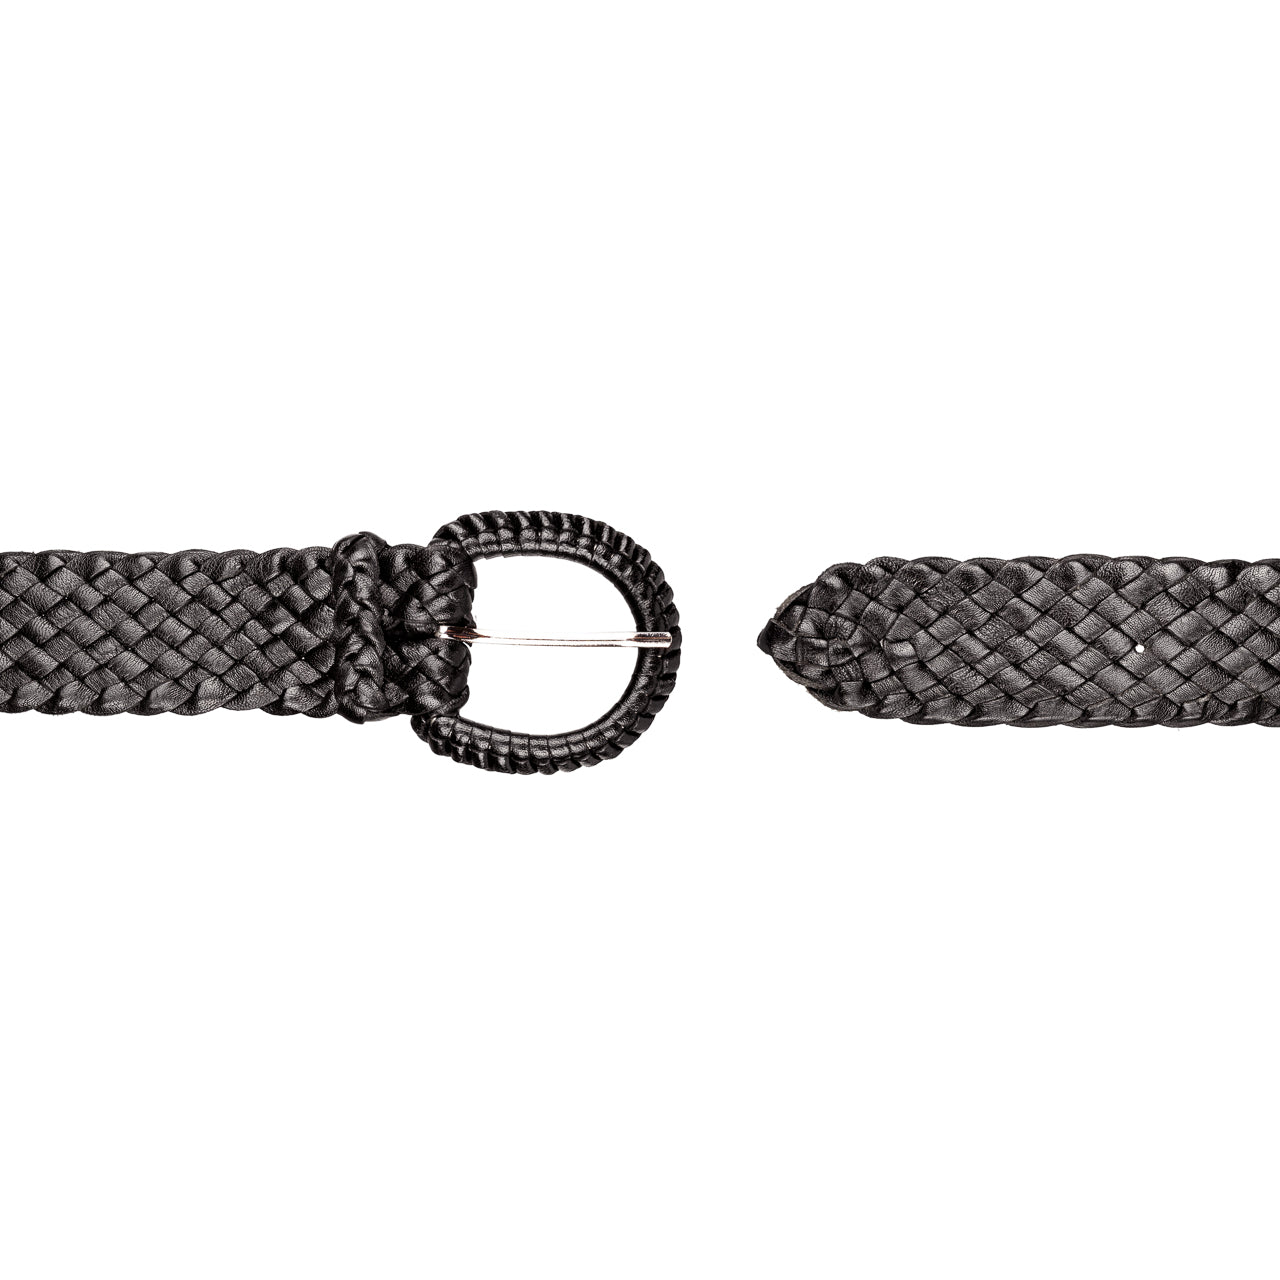 Black Alice: Australian Kangaroo Leather belt, hand-plaited in Brisbane. Durable, supple, and stylish. Available in Black or Tan. 38mm Wide.